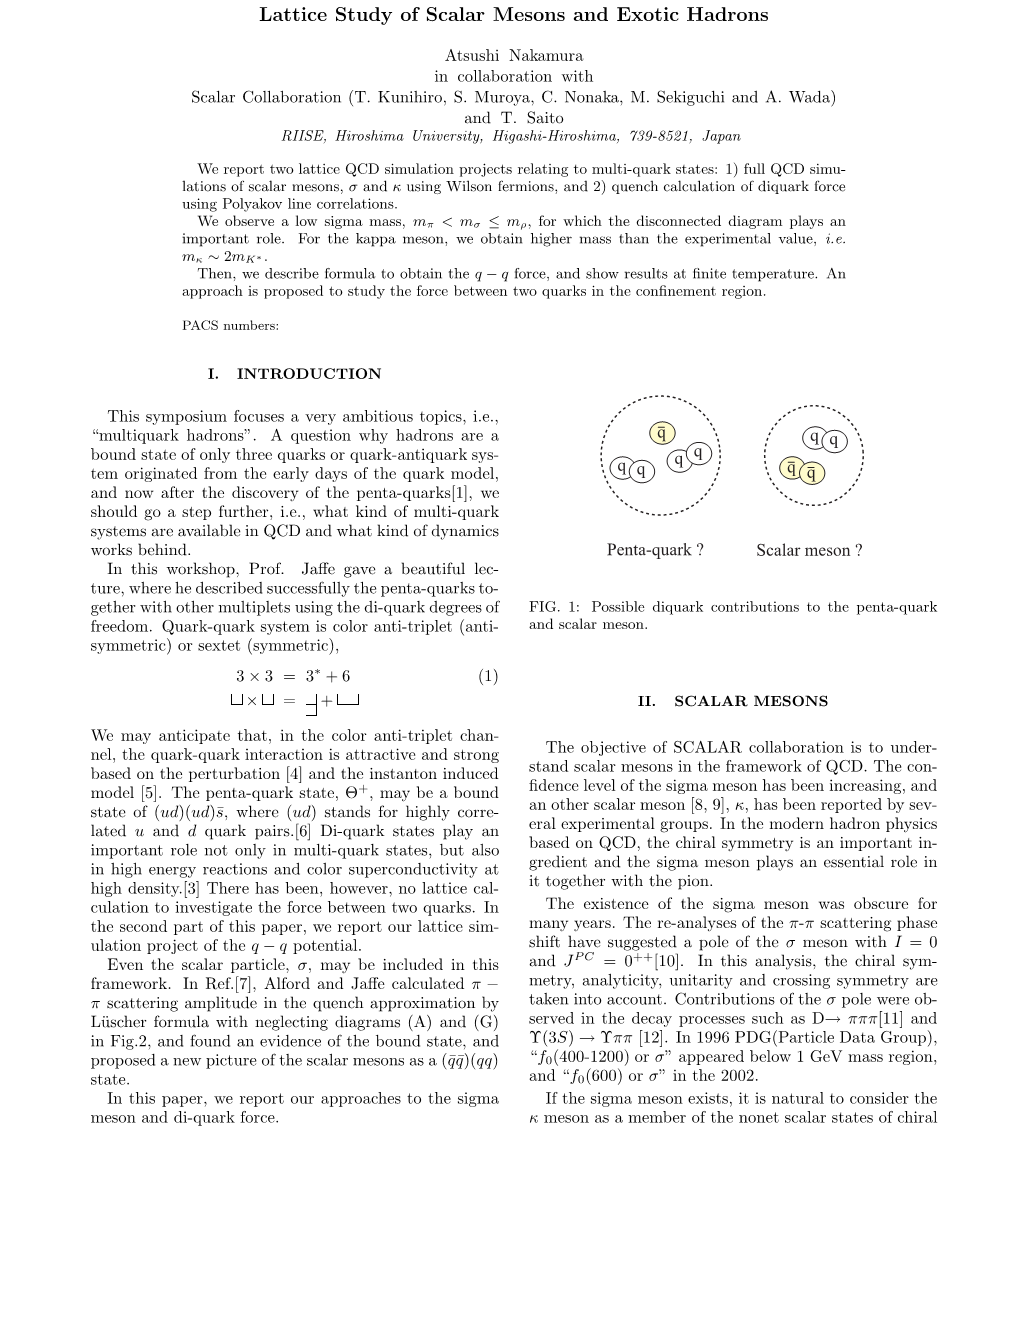 Lattice Study of Scalar Mesons and Exotic Hadrons